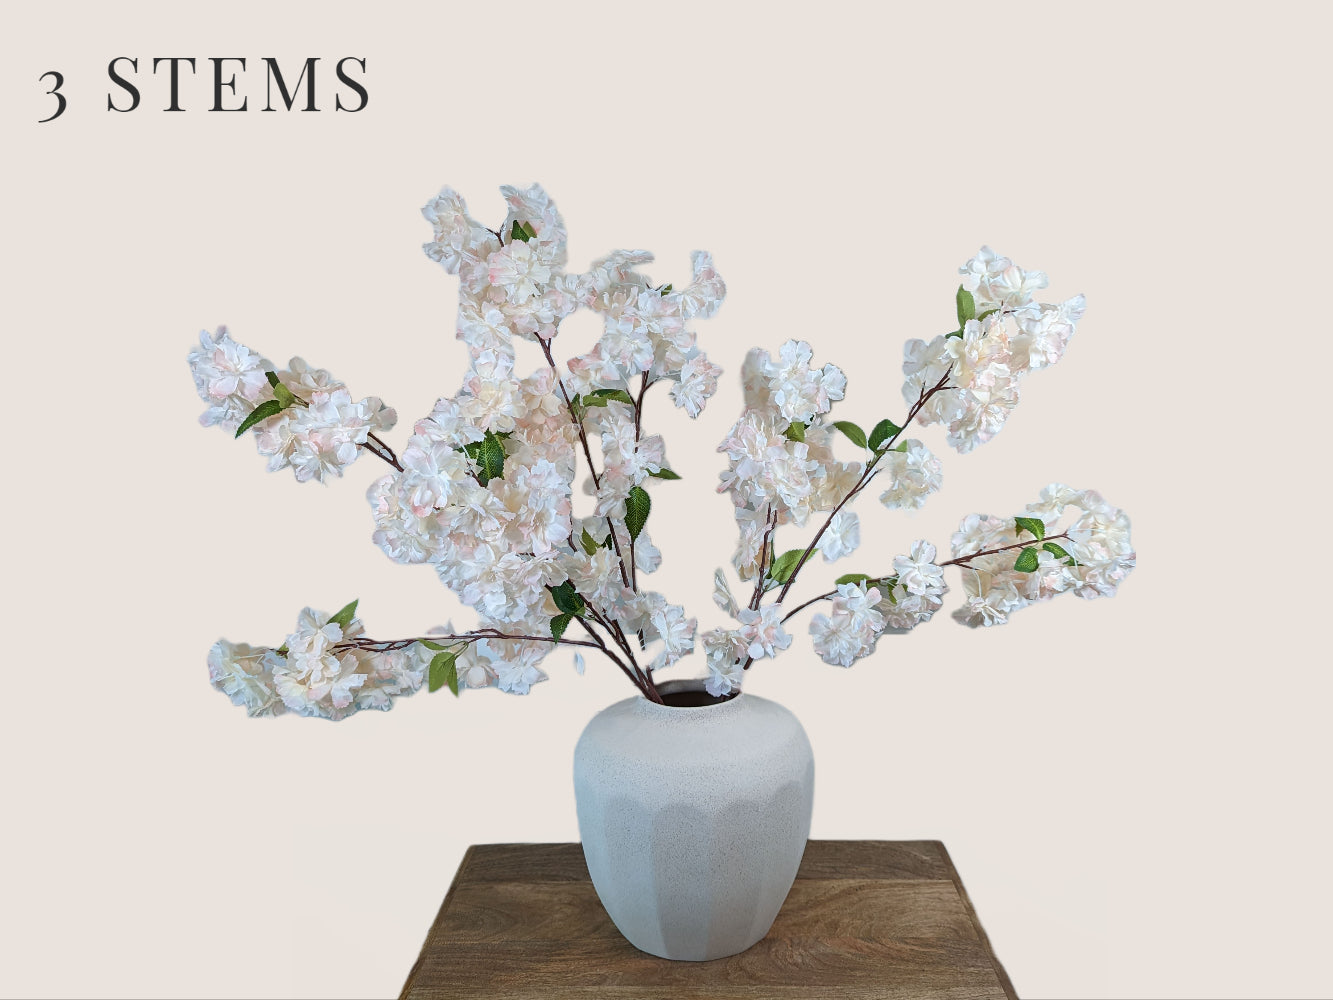 Artificial cherry blossom branches in soft pink and white, with a brown stem. Each stem has 3 branches with fully bloomed cherry blossom flowers in a big waterfall style. The arrangement is in a white vase and pictured against a neutral beige background. The total height of the arrangement is 38 inches, with 16 inches of stem and 22 inches of branch and flower.